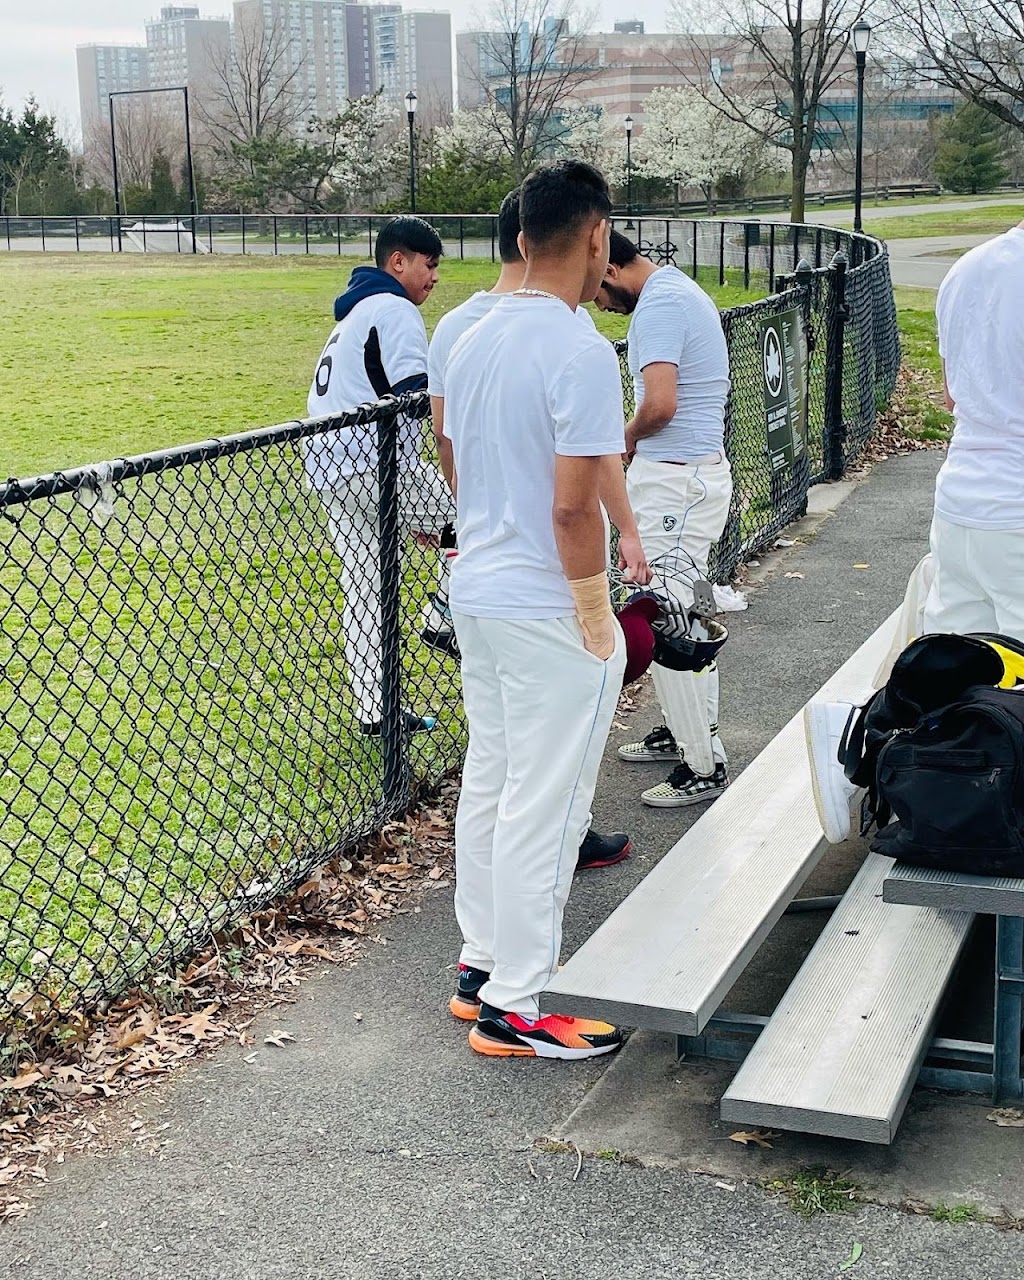 Roy A. Sweeney Cricket Oval | Spring Creek Park Gateway Drive off of, Erskine St, Brooklyn, NY 11208 | Phone: (212) 639-9675